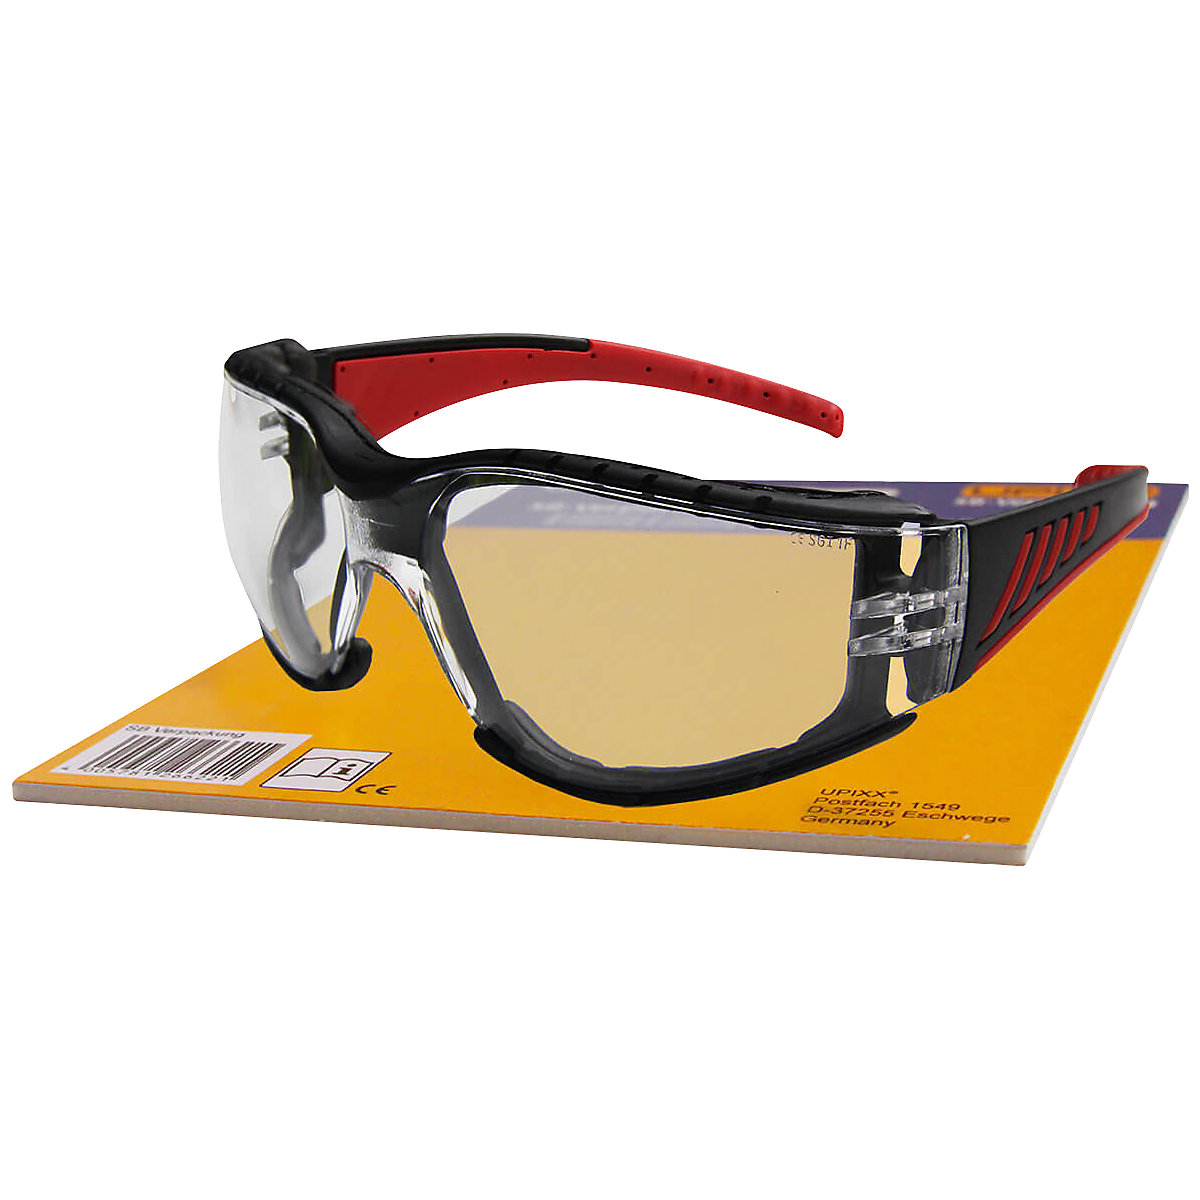 Red Vision safety goggles